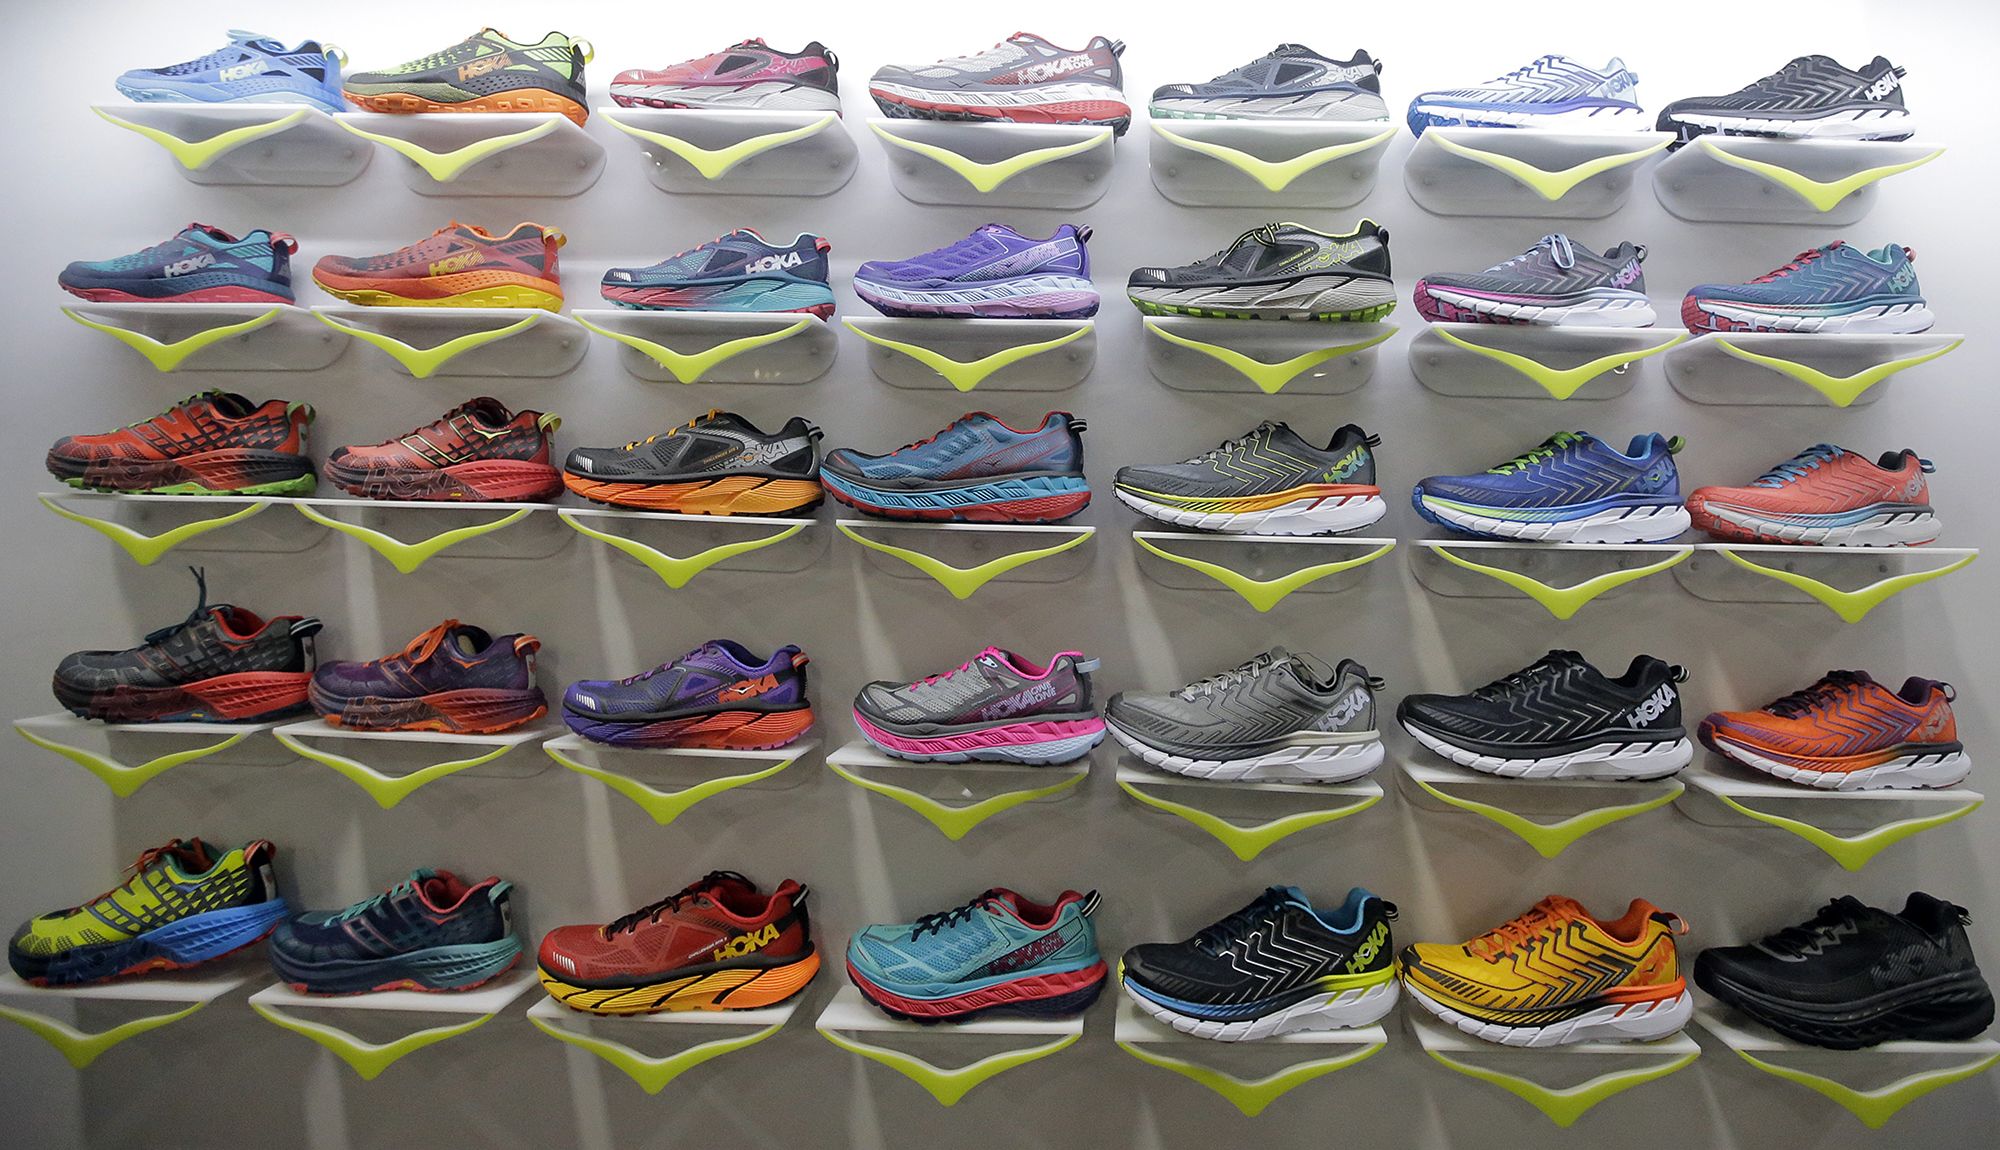 Hoka sneakers: Why these chunky, ugly running shoes are selling like crazy  | CNN Business